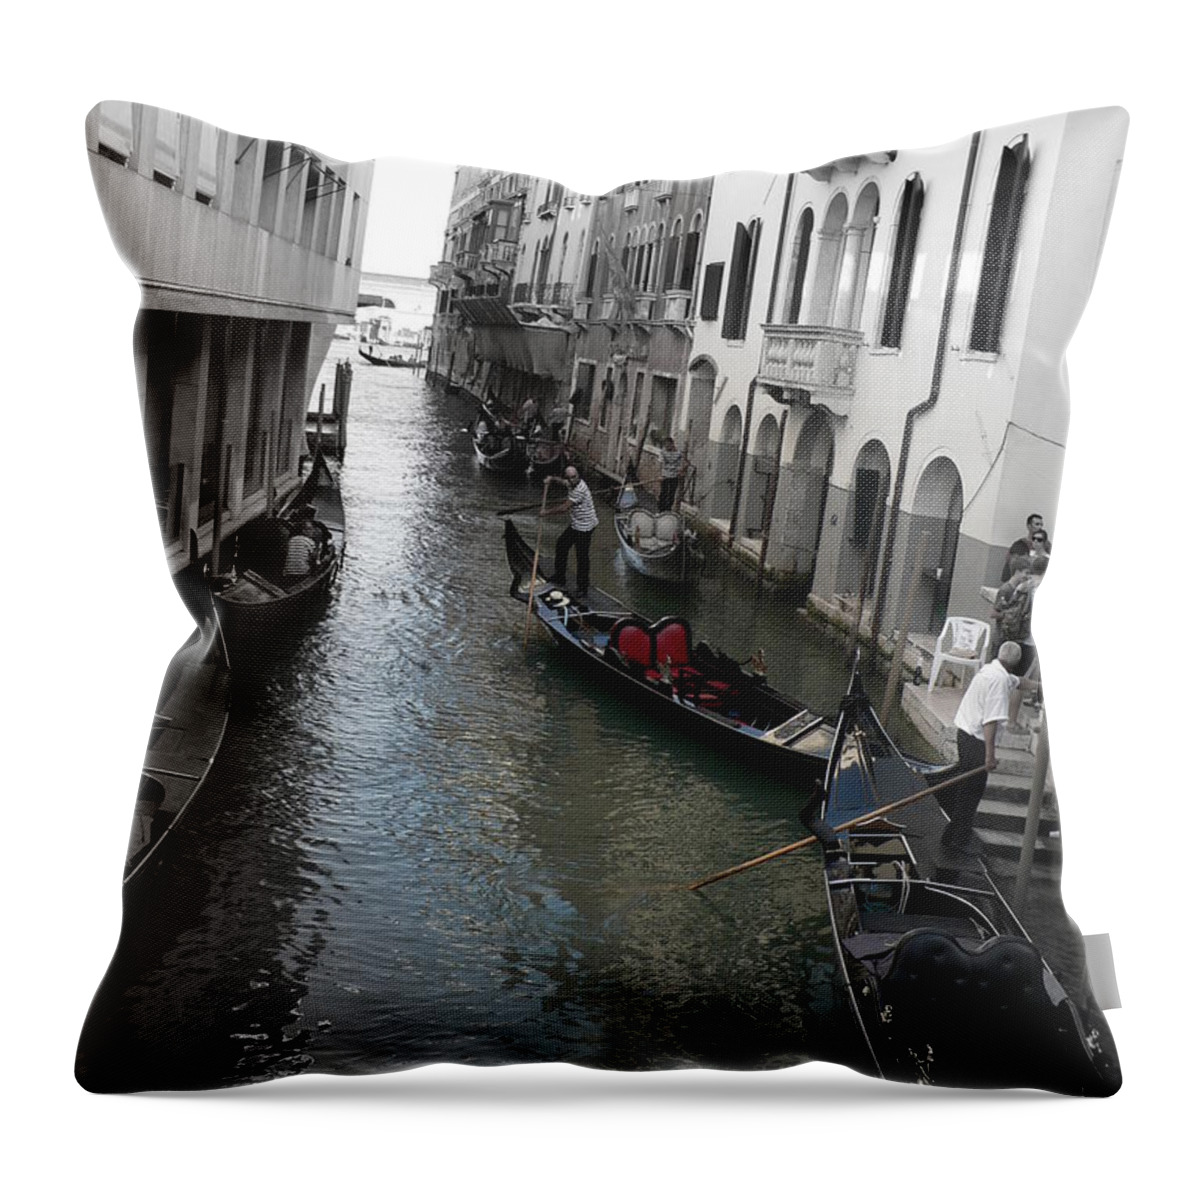 Gondolier Throw Pillow featuring the photograph Gondolier by Laurel Best